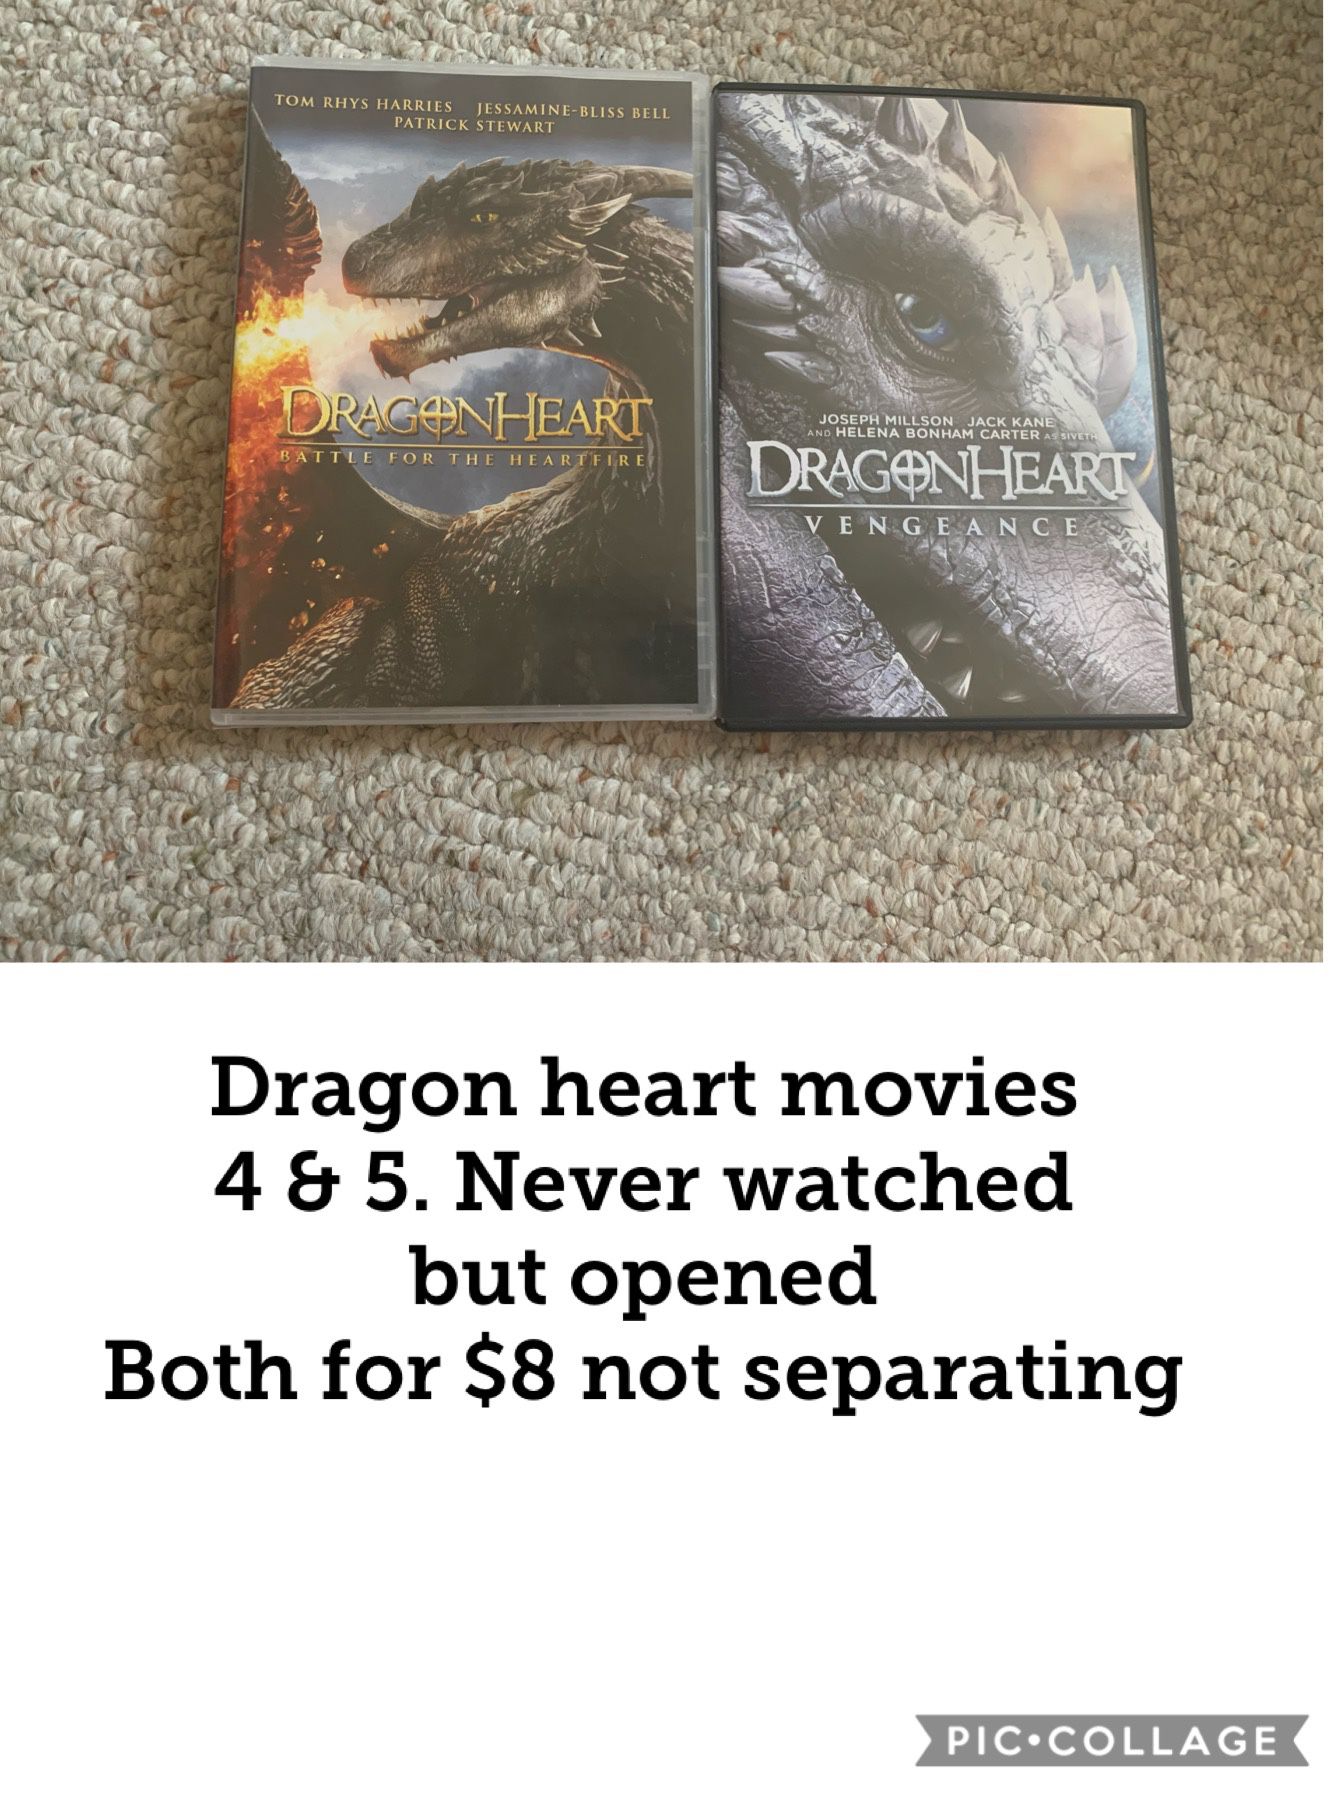 Dragon heart dvd movies. 4 and 5 lot